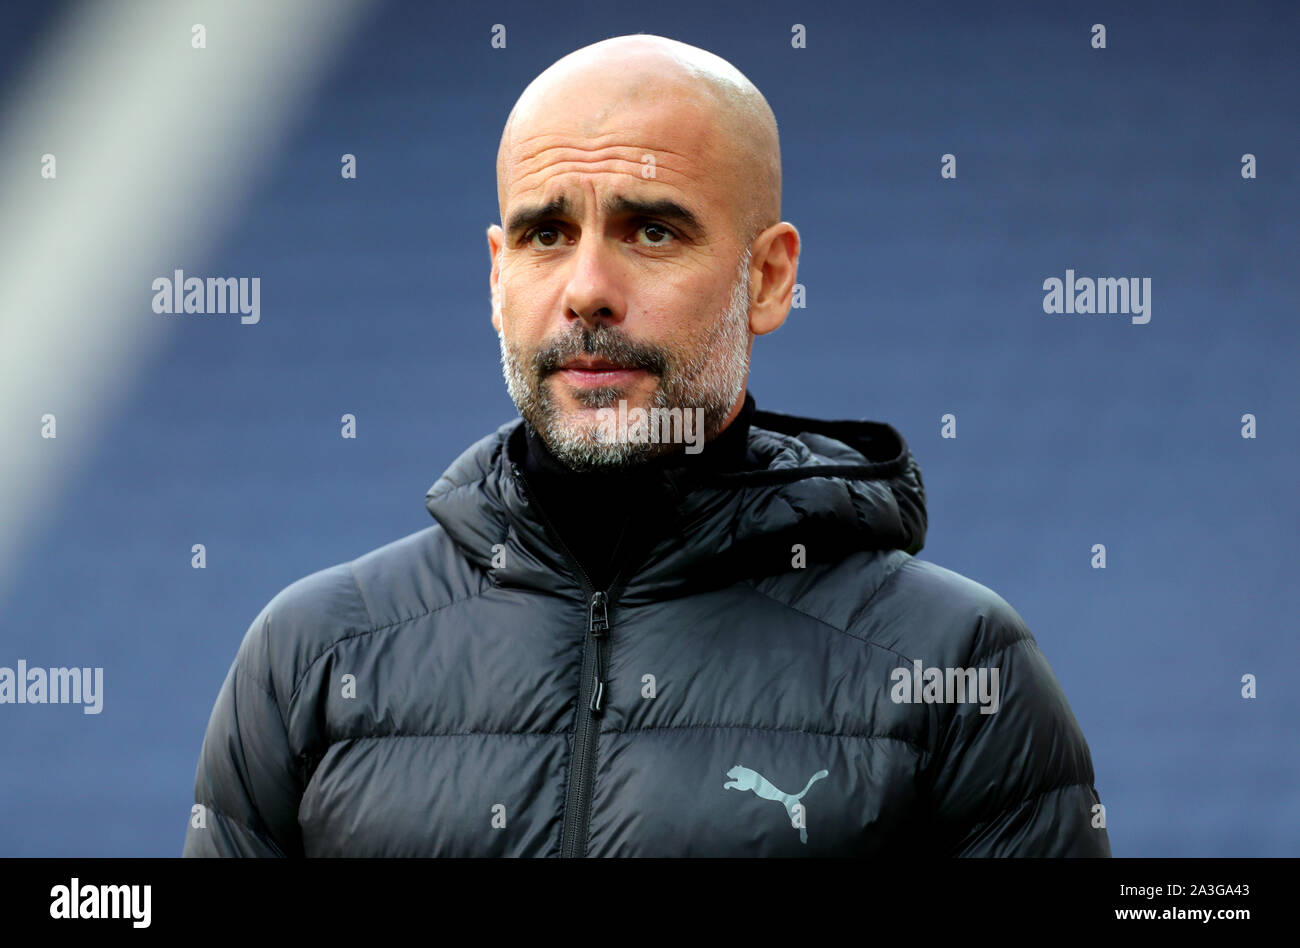 Manchester City manager Pep Guardiola inspects the pitch prior to kick-off during the Carabao Cup, Third Round match at Deepdale Stadium, Preston Stock Photo